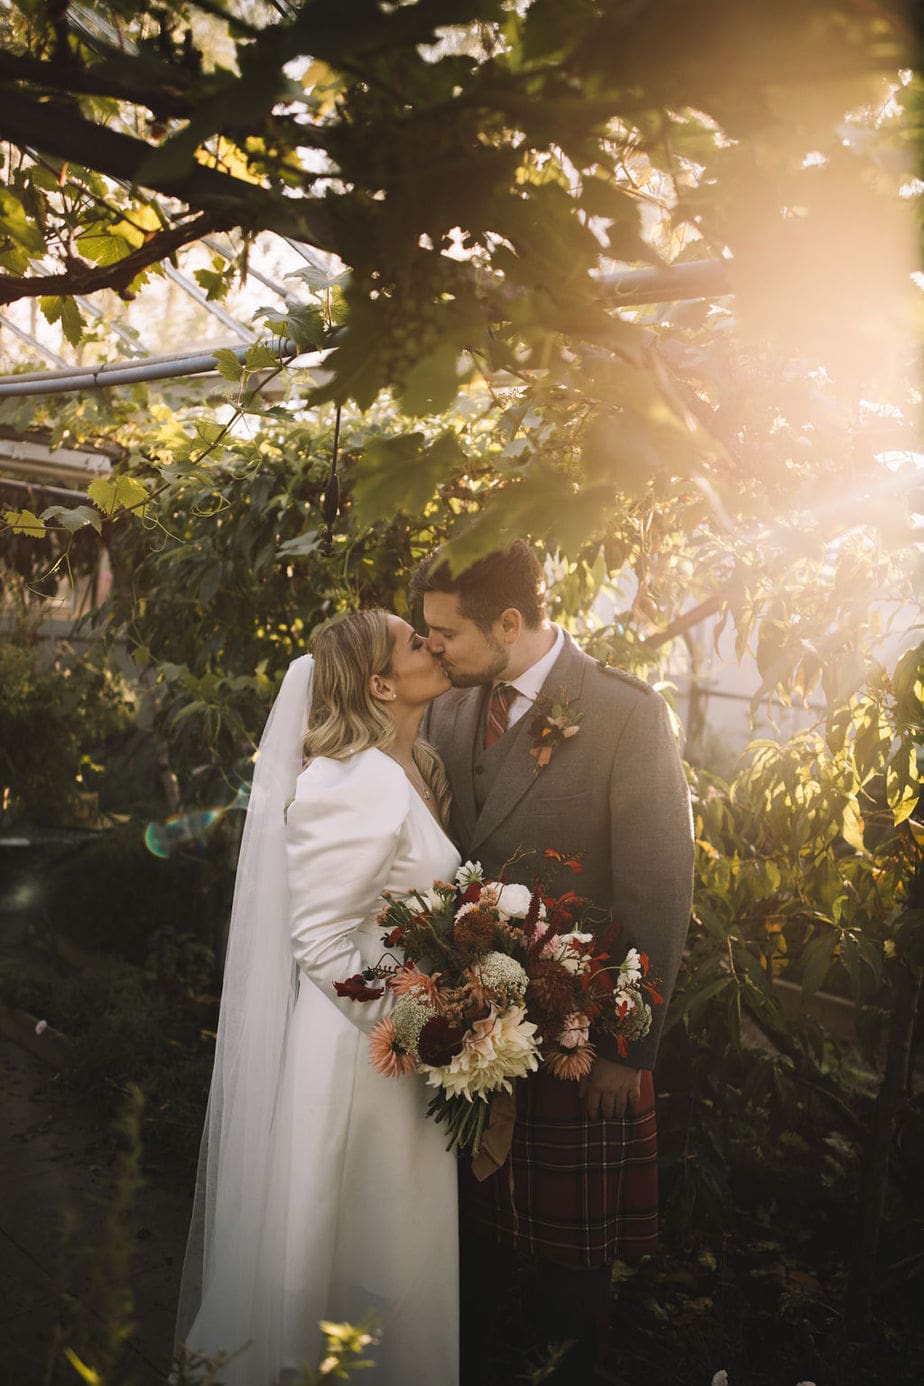 Bride and groom kissing between the greenery at the secret herb garden during their micro wedding in Edinburgh.